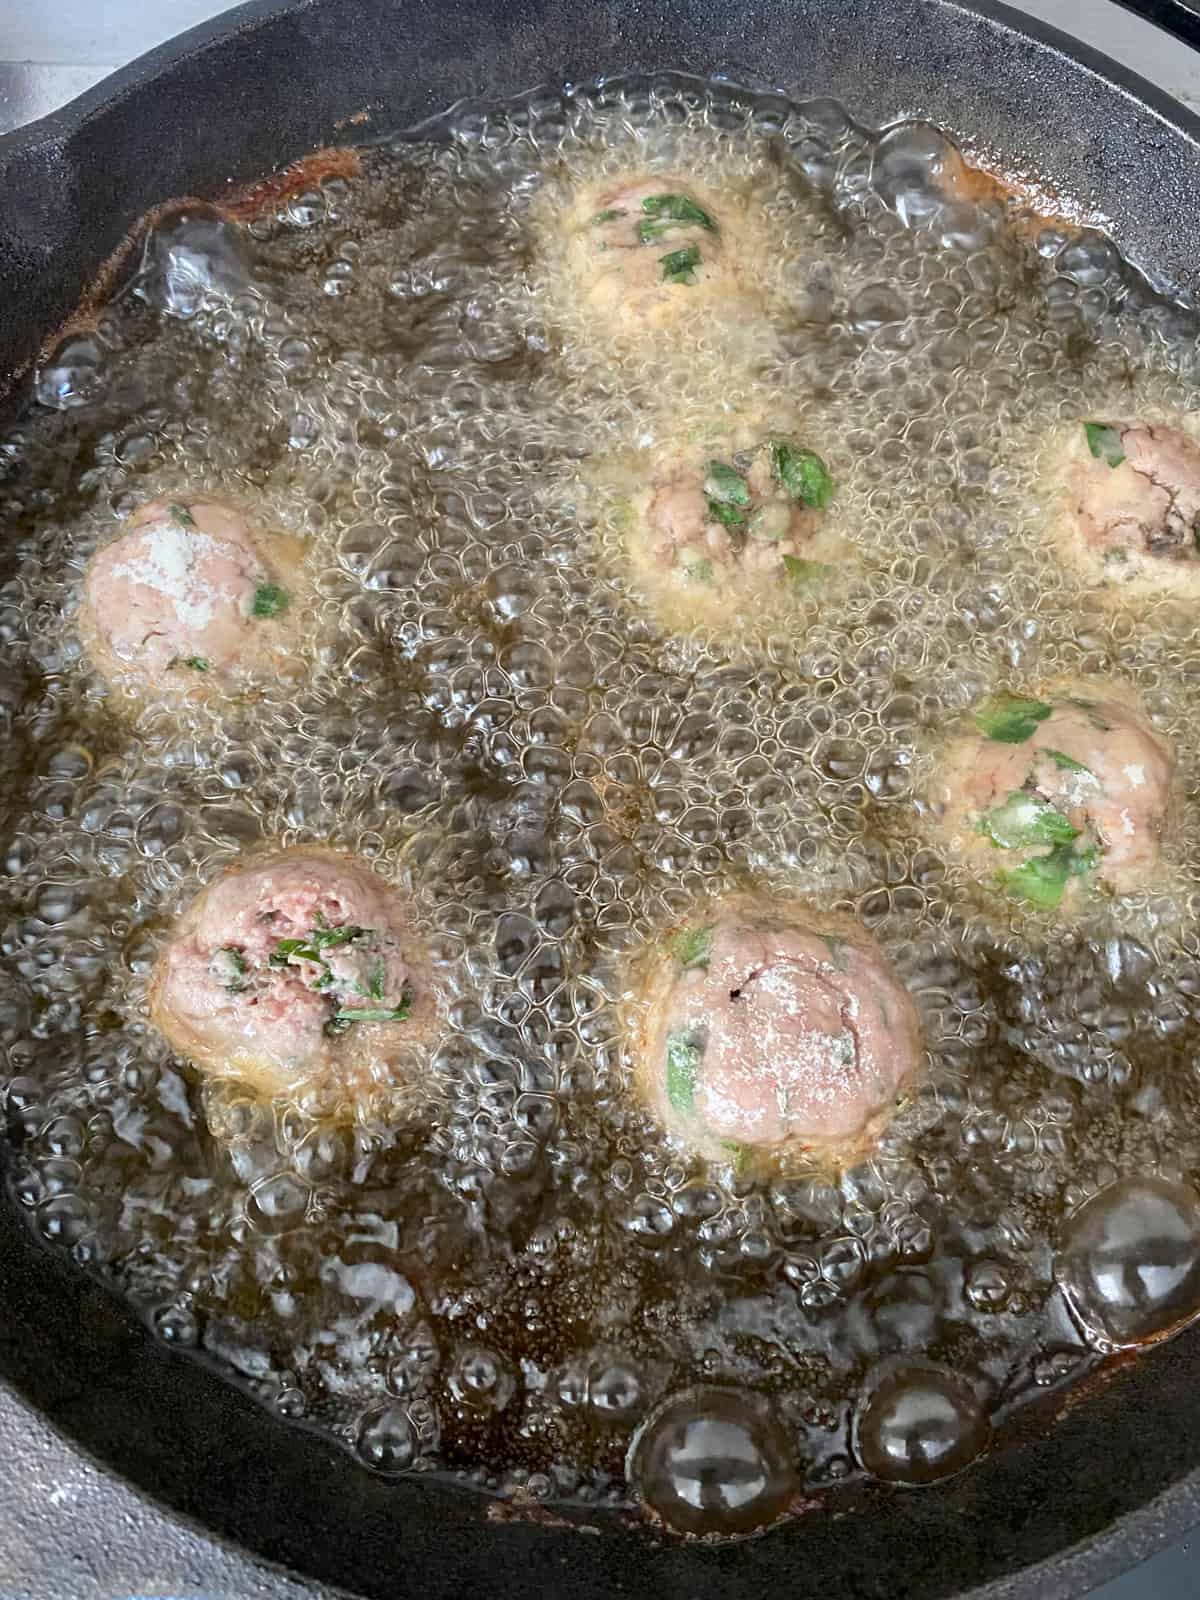 Meatballs frying in a cast iron pan.